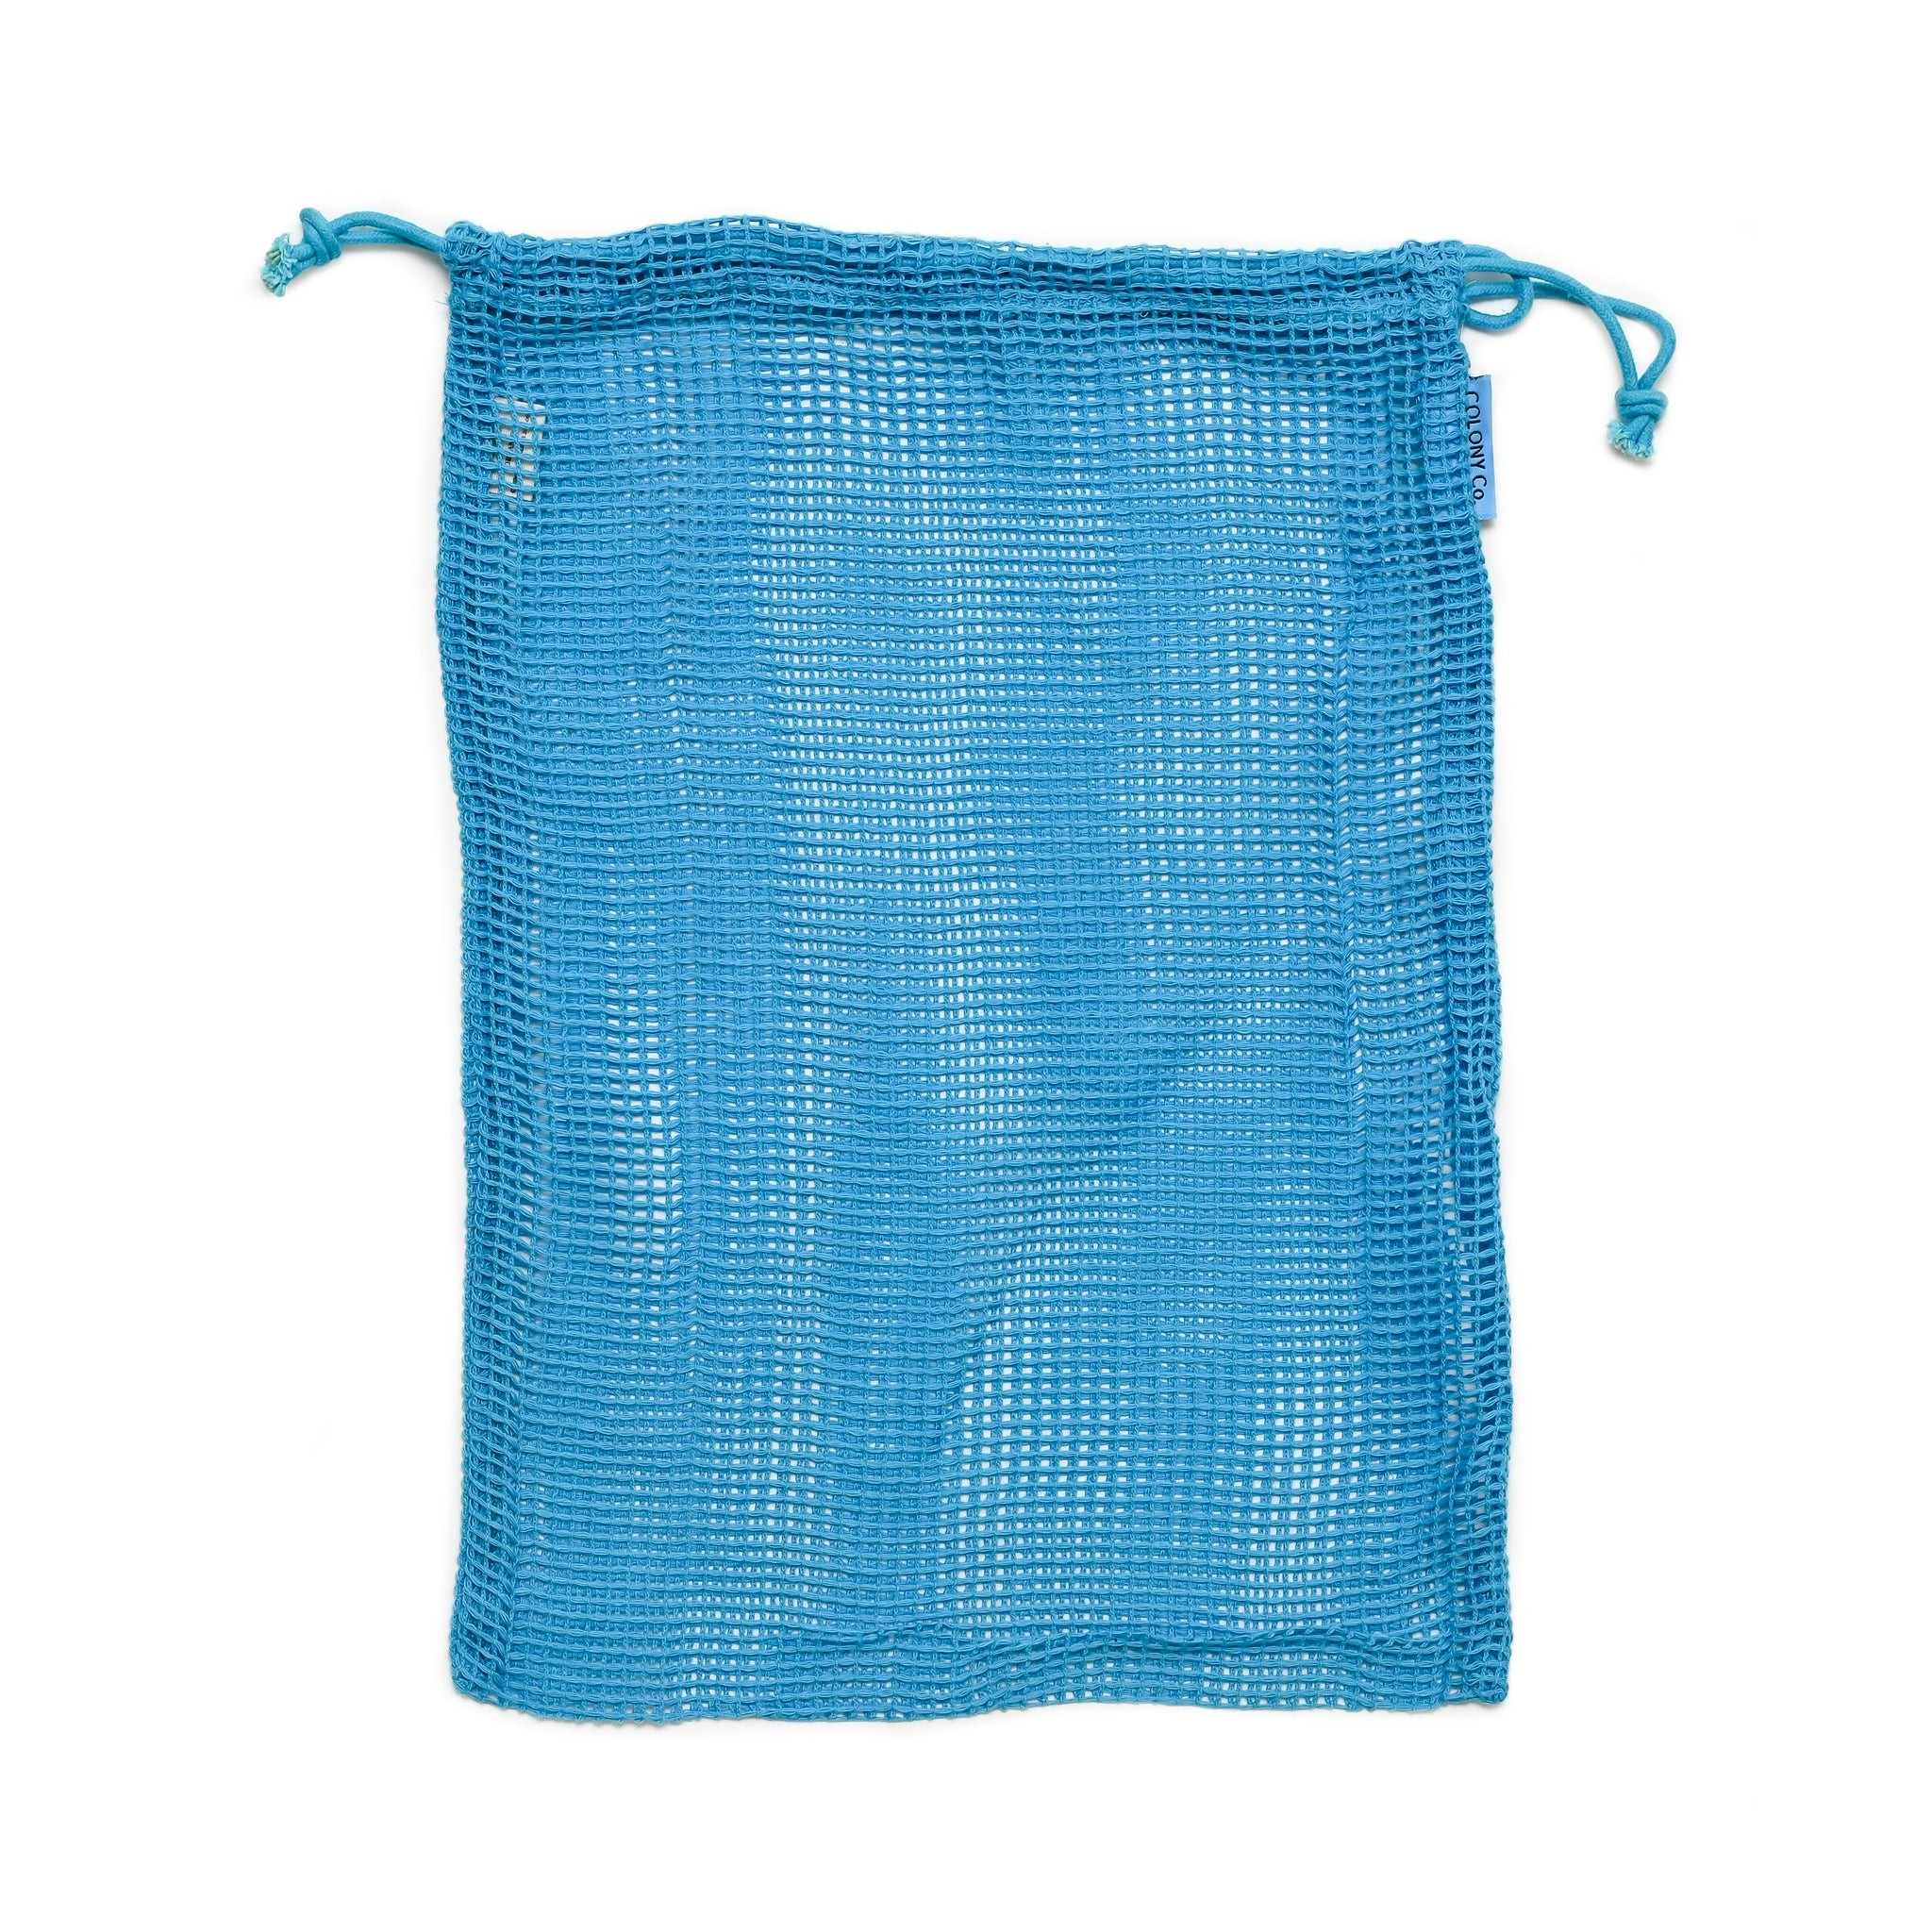 Cotton Mesh Bag For Fruits and Vegetables - My Ati